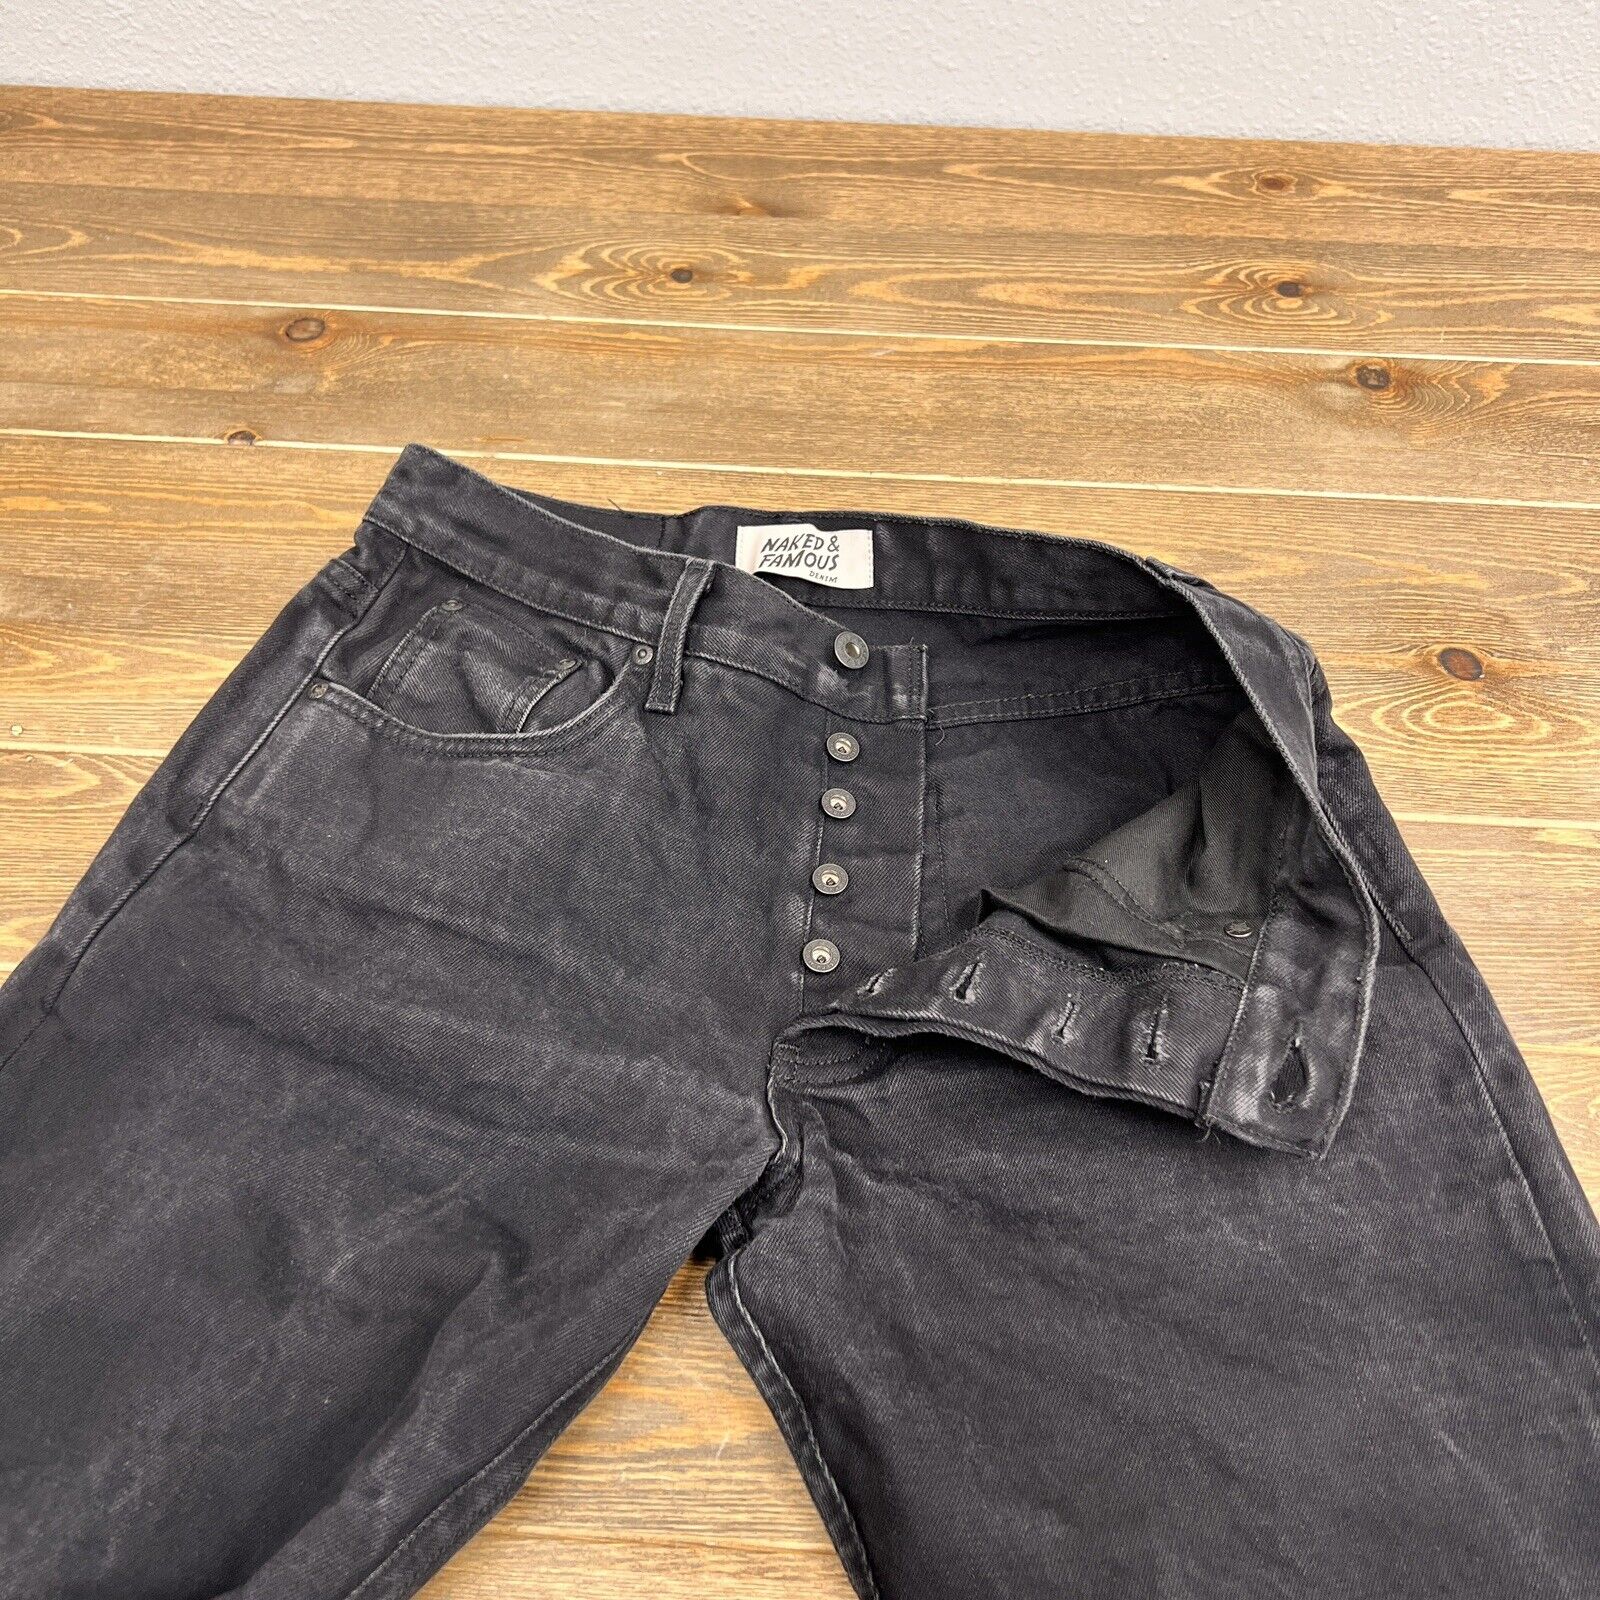 Naked and famous black jeans sz 30 x28 - image 3